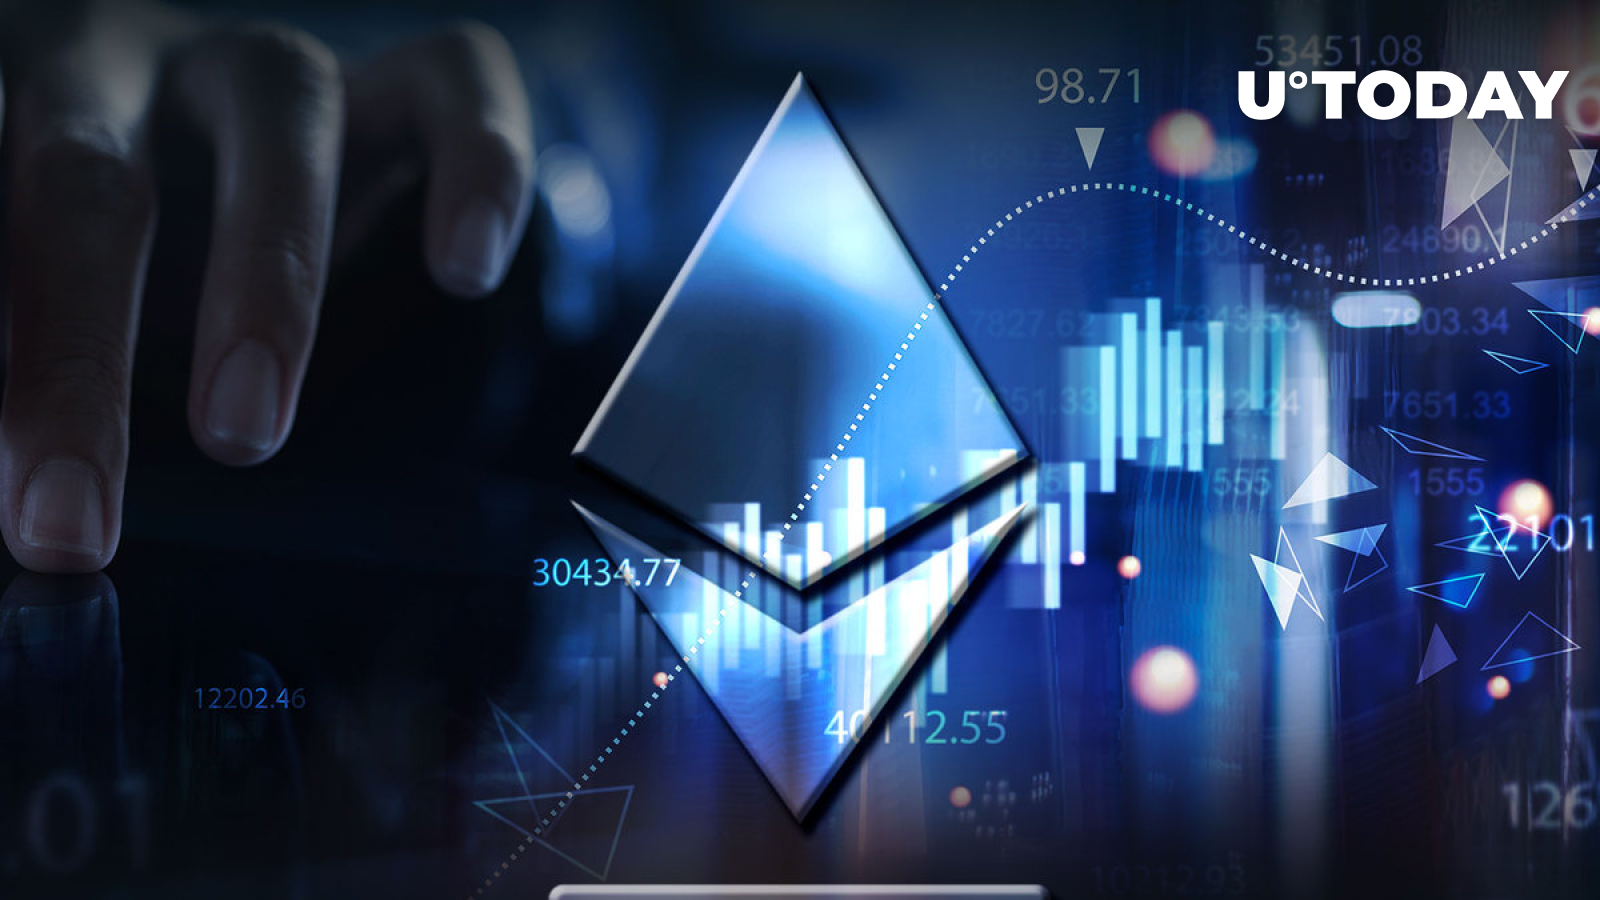 Ethereum: Here’s Latest Attempt at ETH Price Rebound as Shown by Indicators